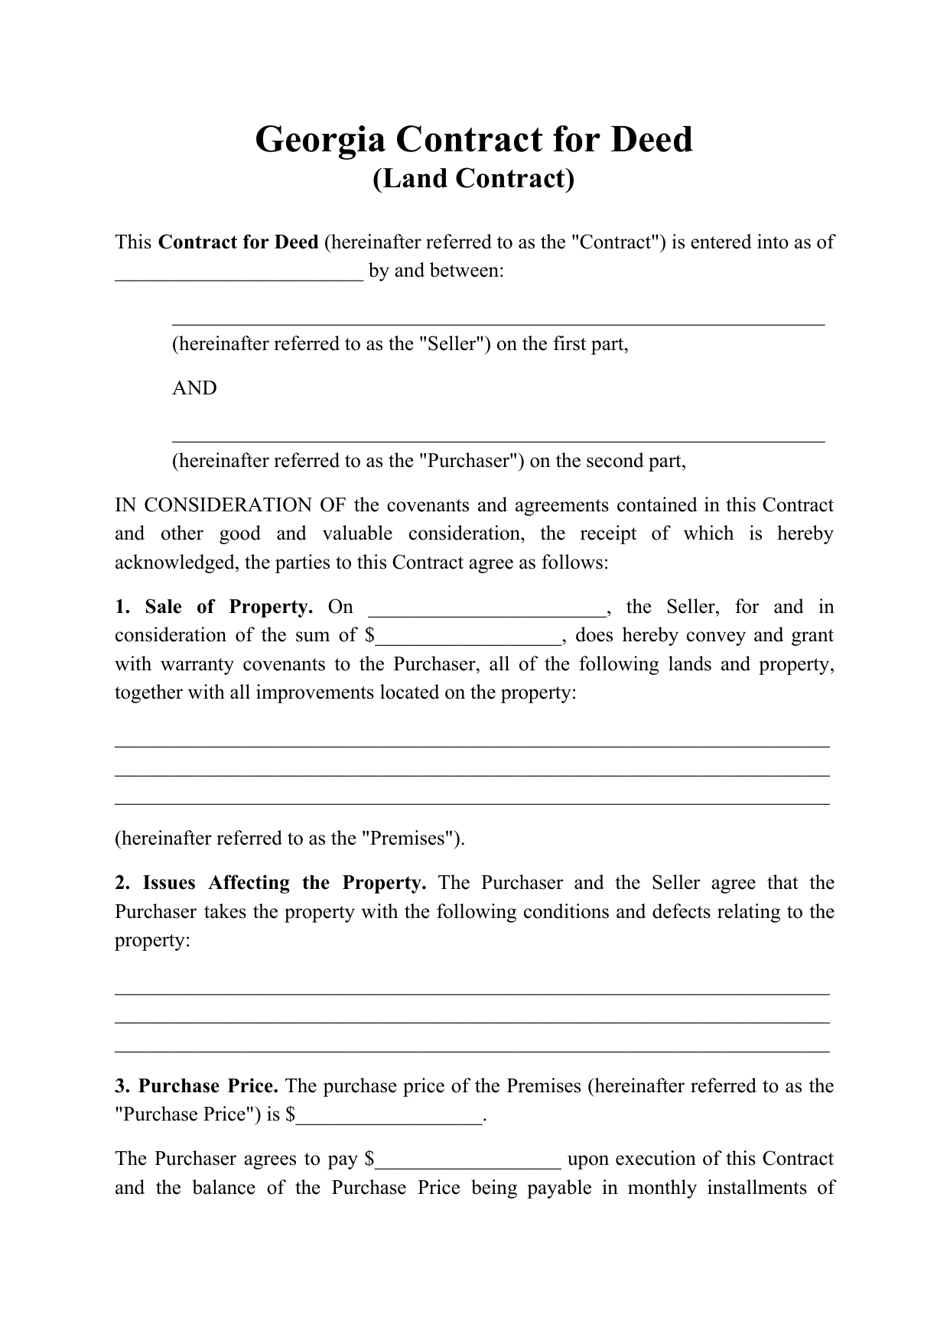 Contract for Deed (Land Contract) - Georgia (United States), Page 1